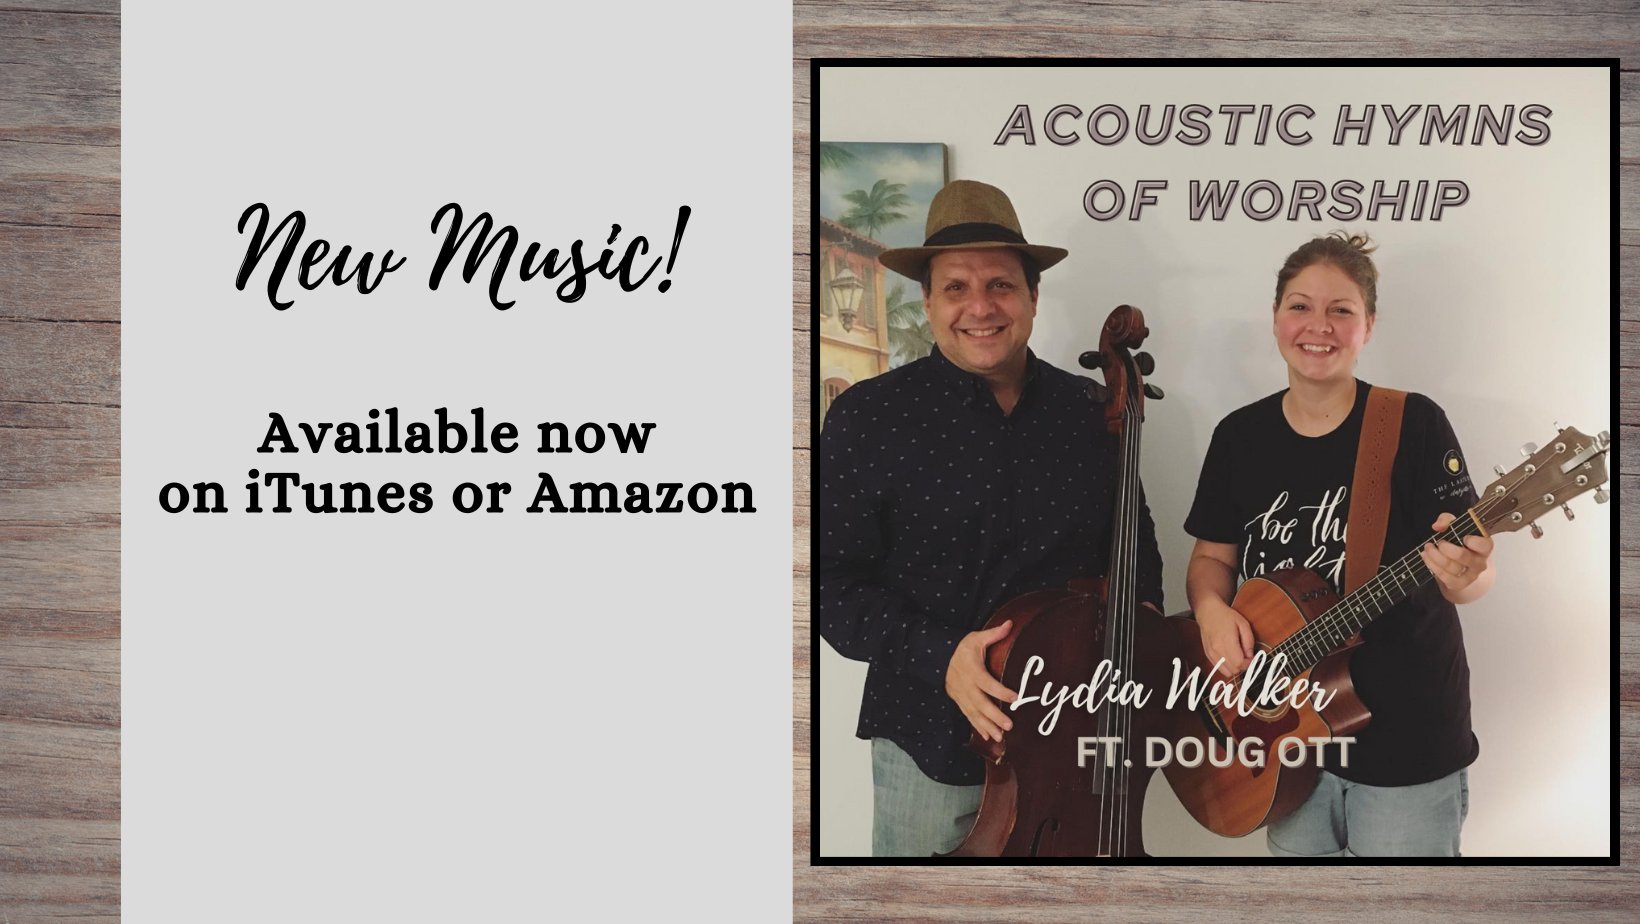 Acoustic Hymns of Worship Available Now